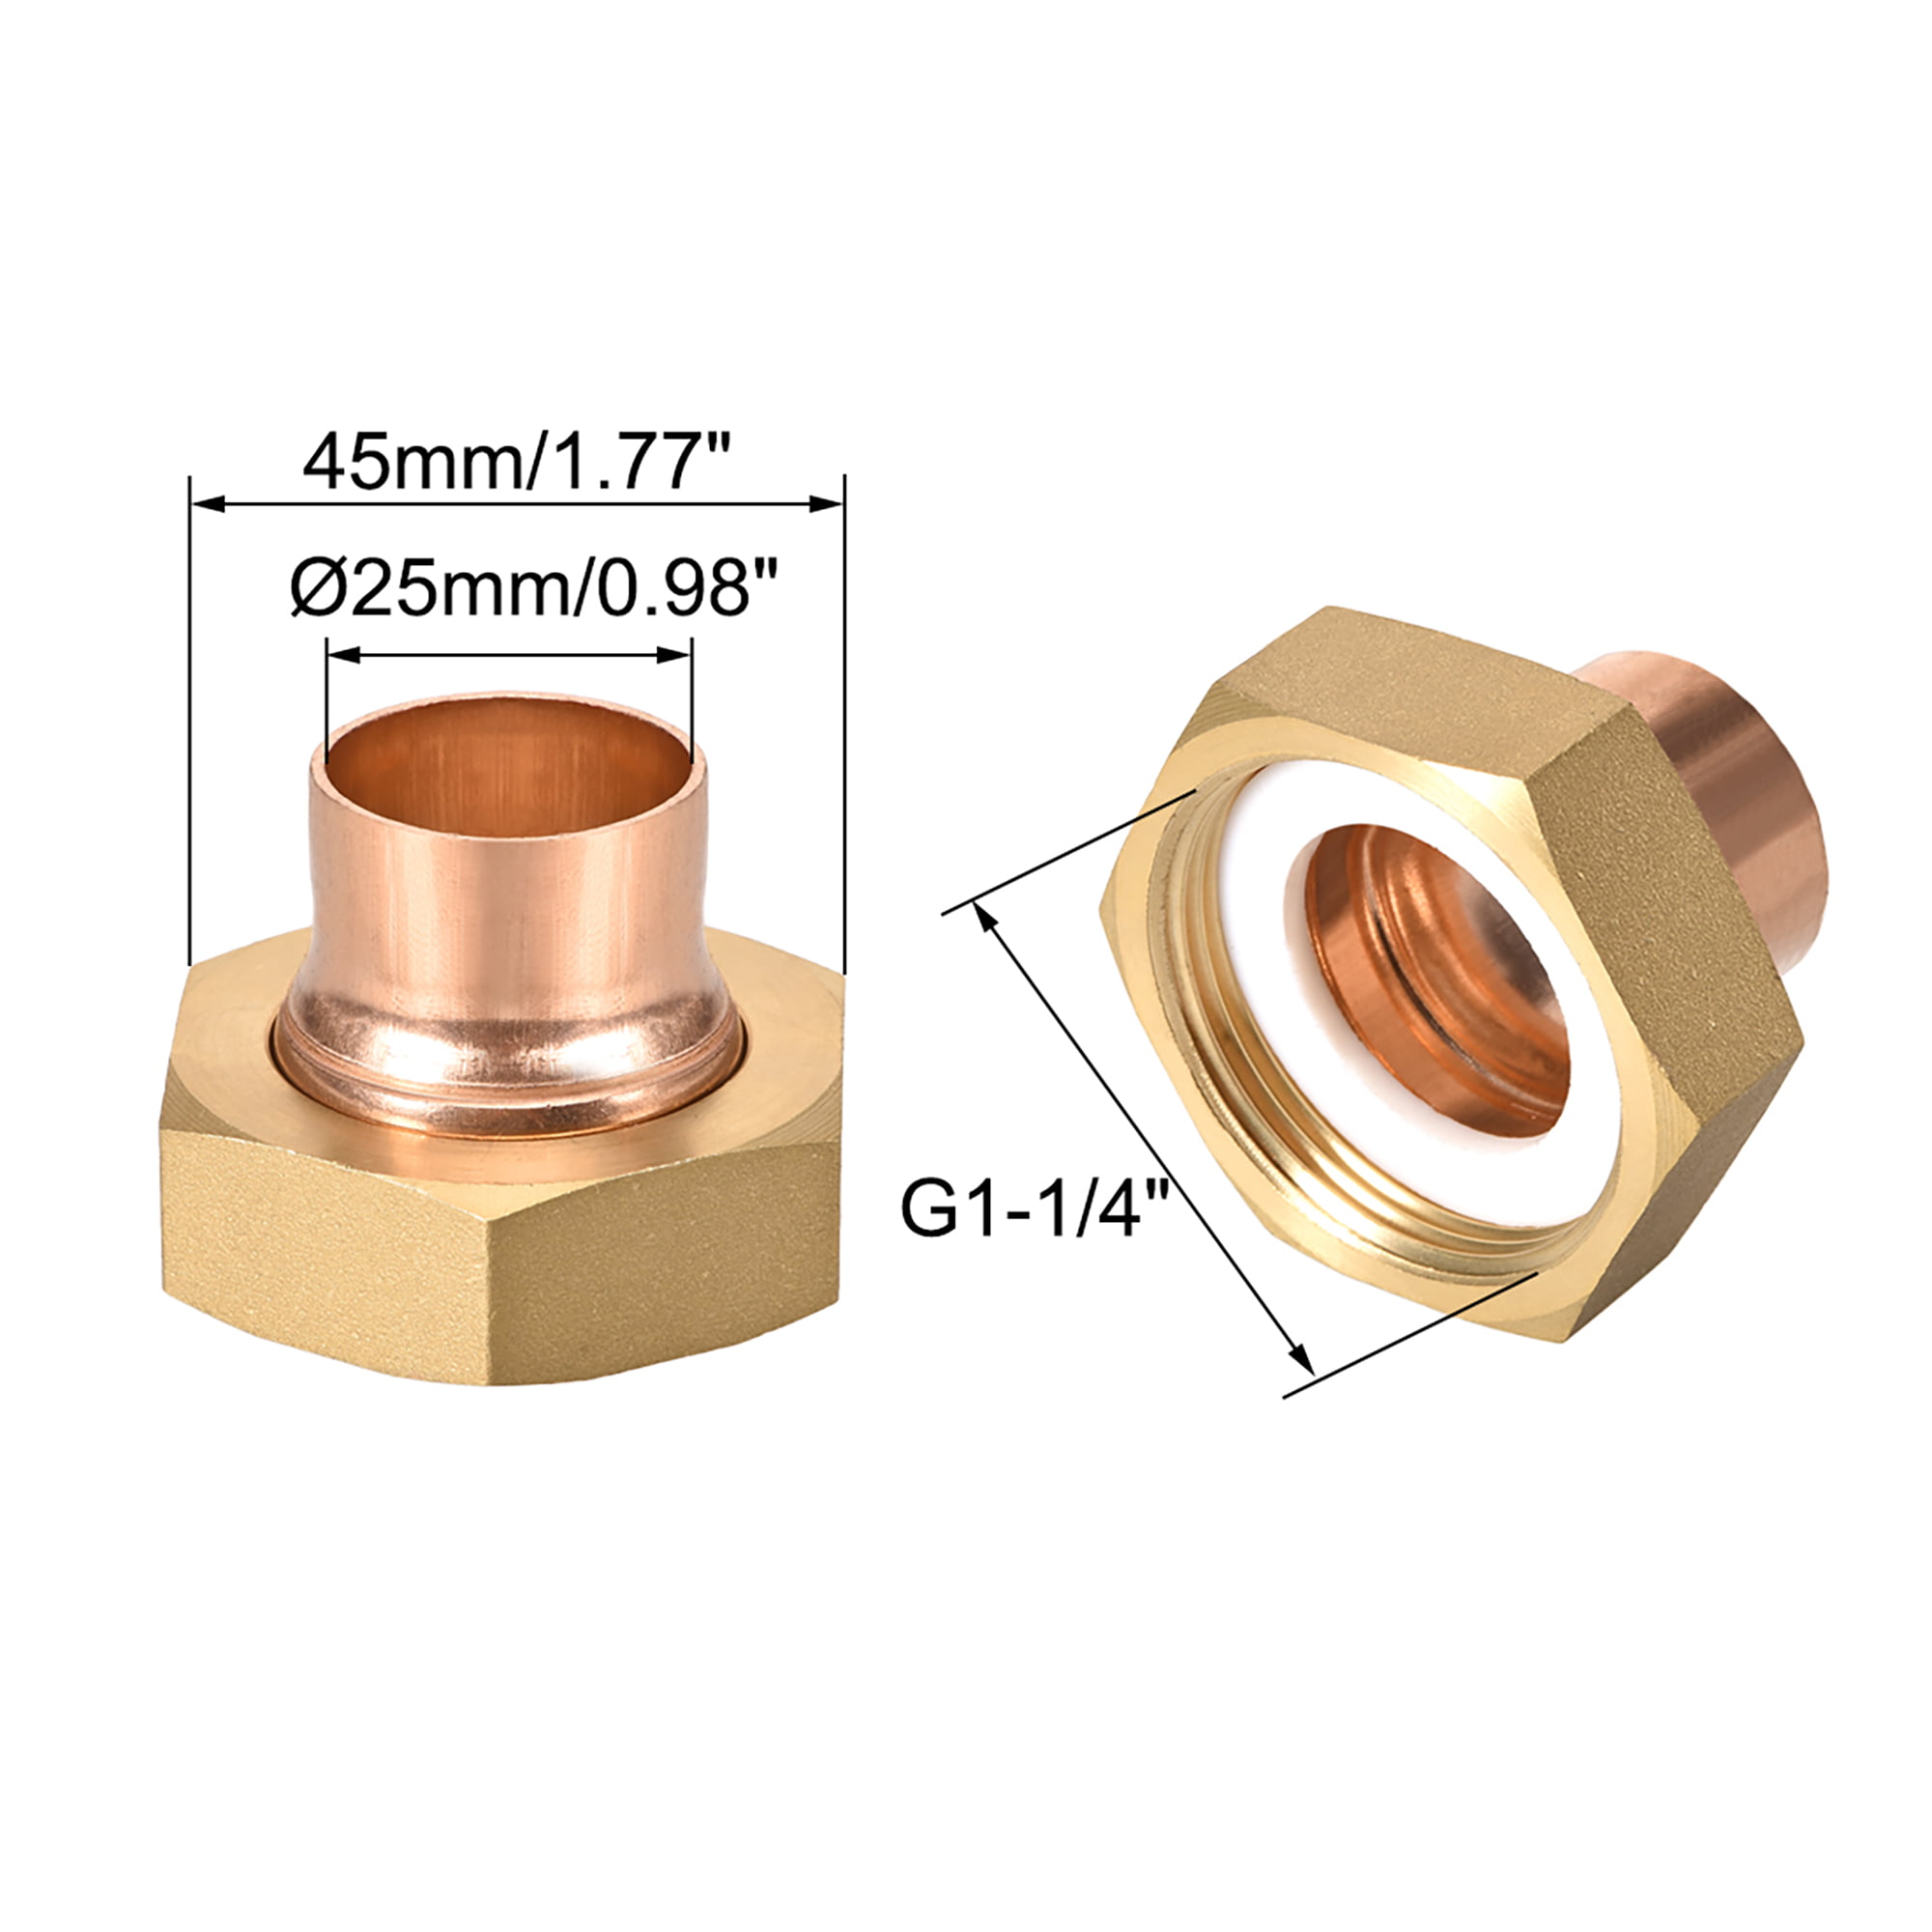 Details about   G1 1/4 Copper Union Fitting with Sweat for 25mm Nominal Size Pipes 